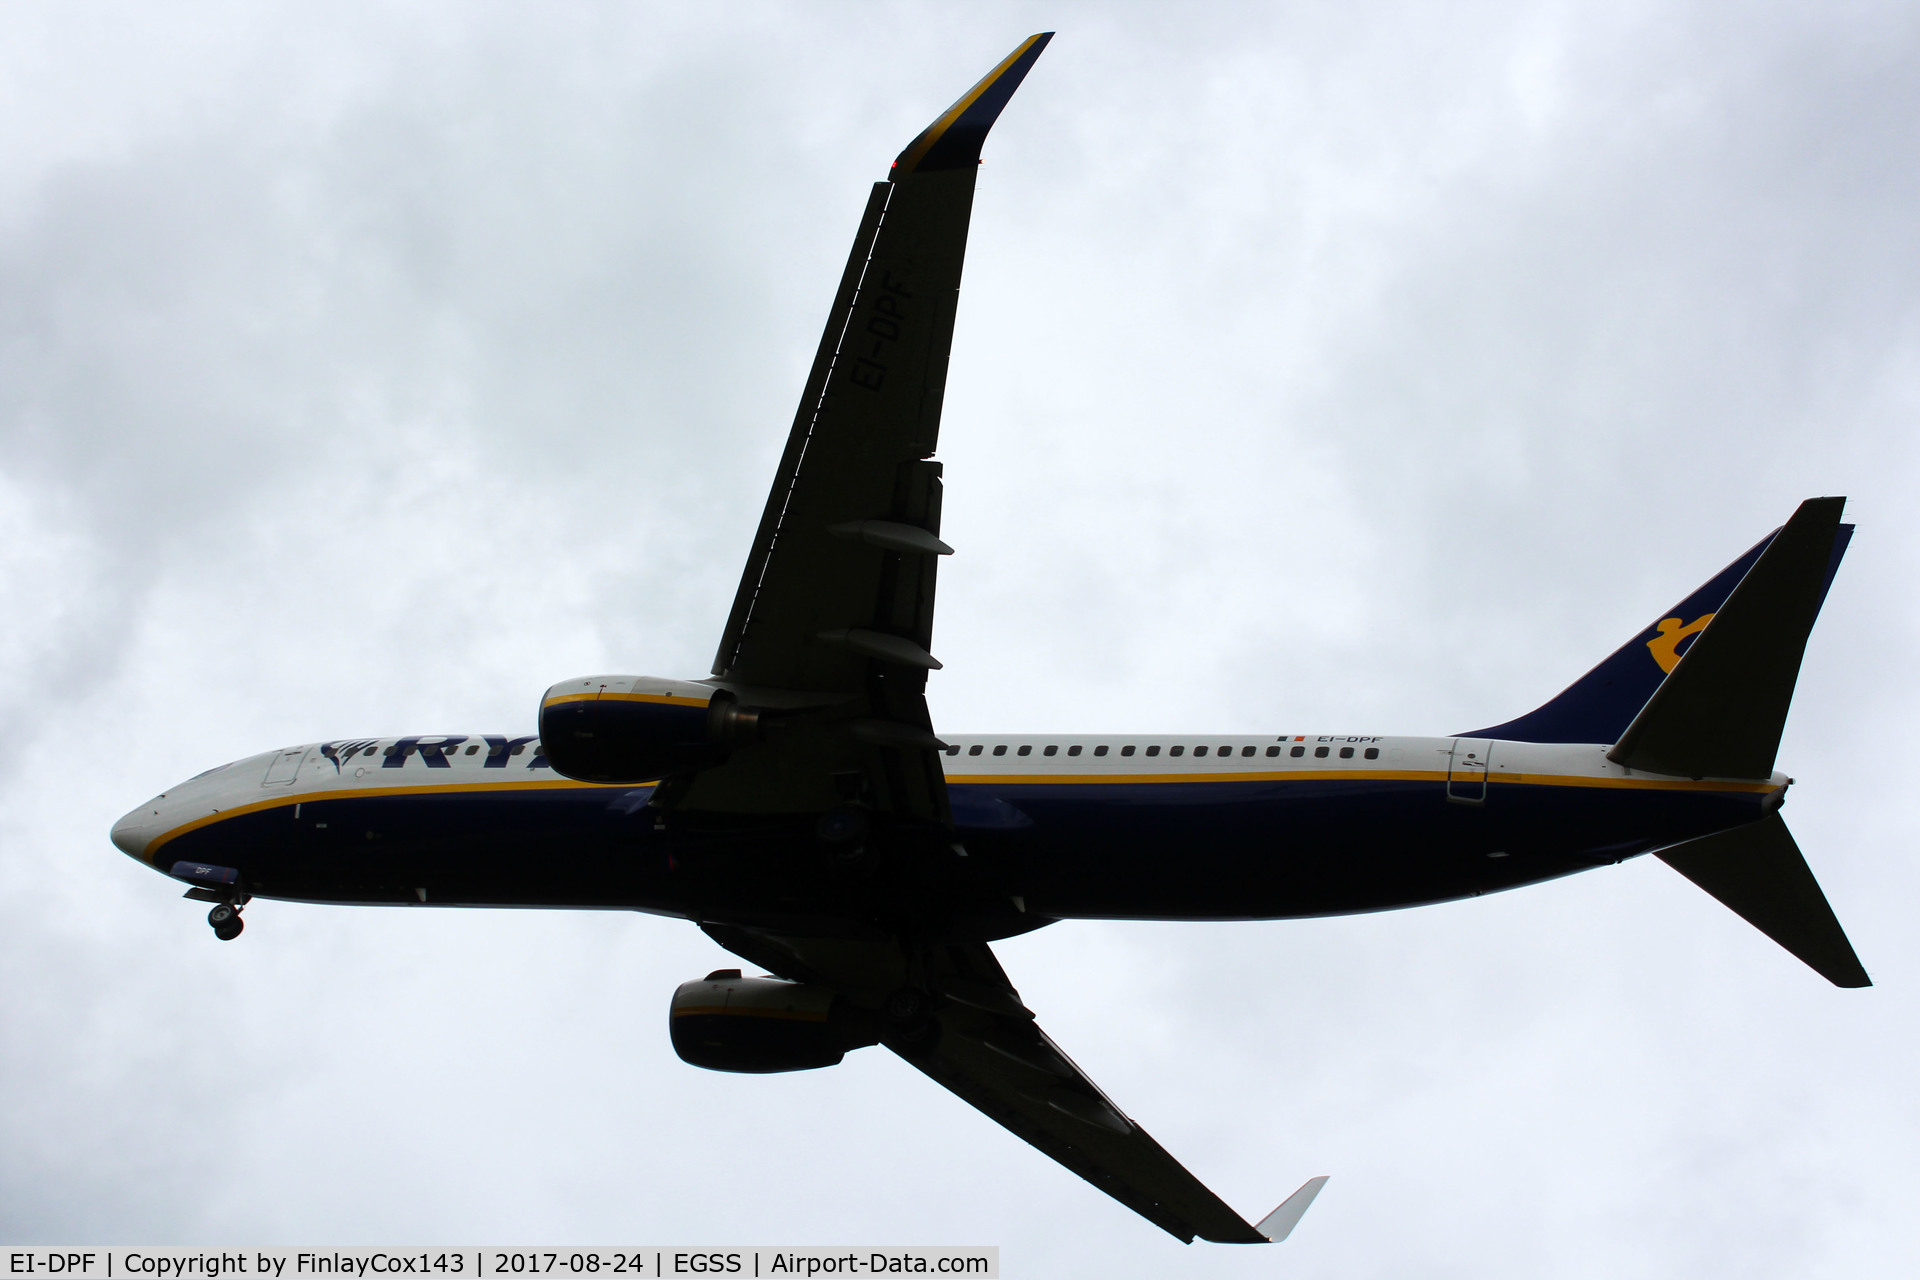 EI-DPF, 2007 Boeing 737-8AS C/N 33606, Landing at London Stansted (STN) from Lamezia Terme (SUF) as FR4967